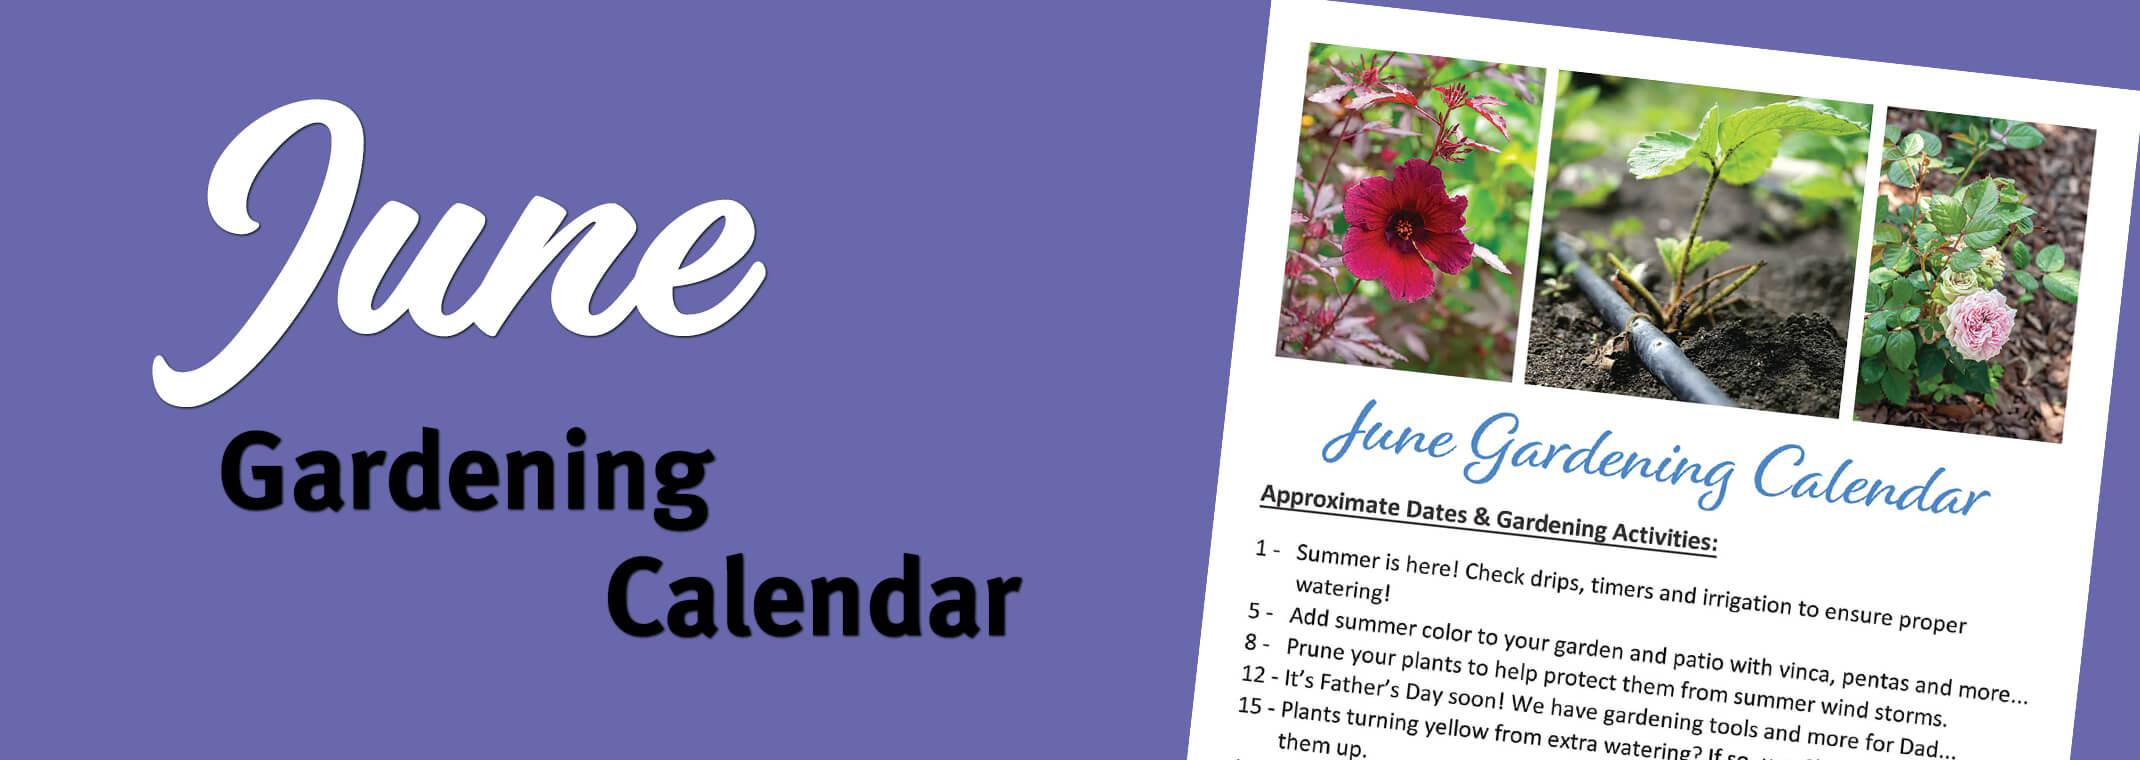 June Gardening Calendar text on a purple background with a small image of our June Gardening Calendar flyer.